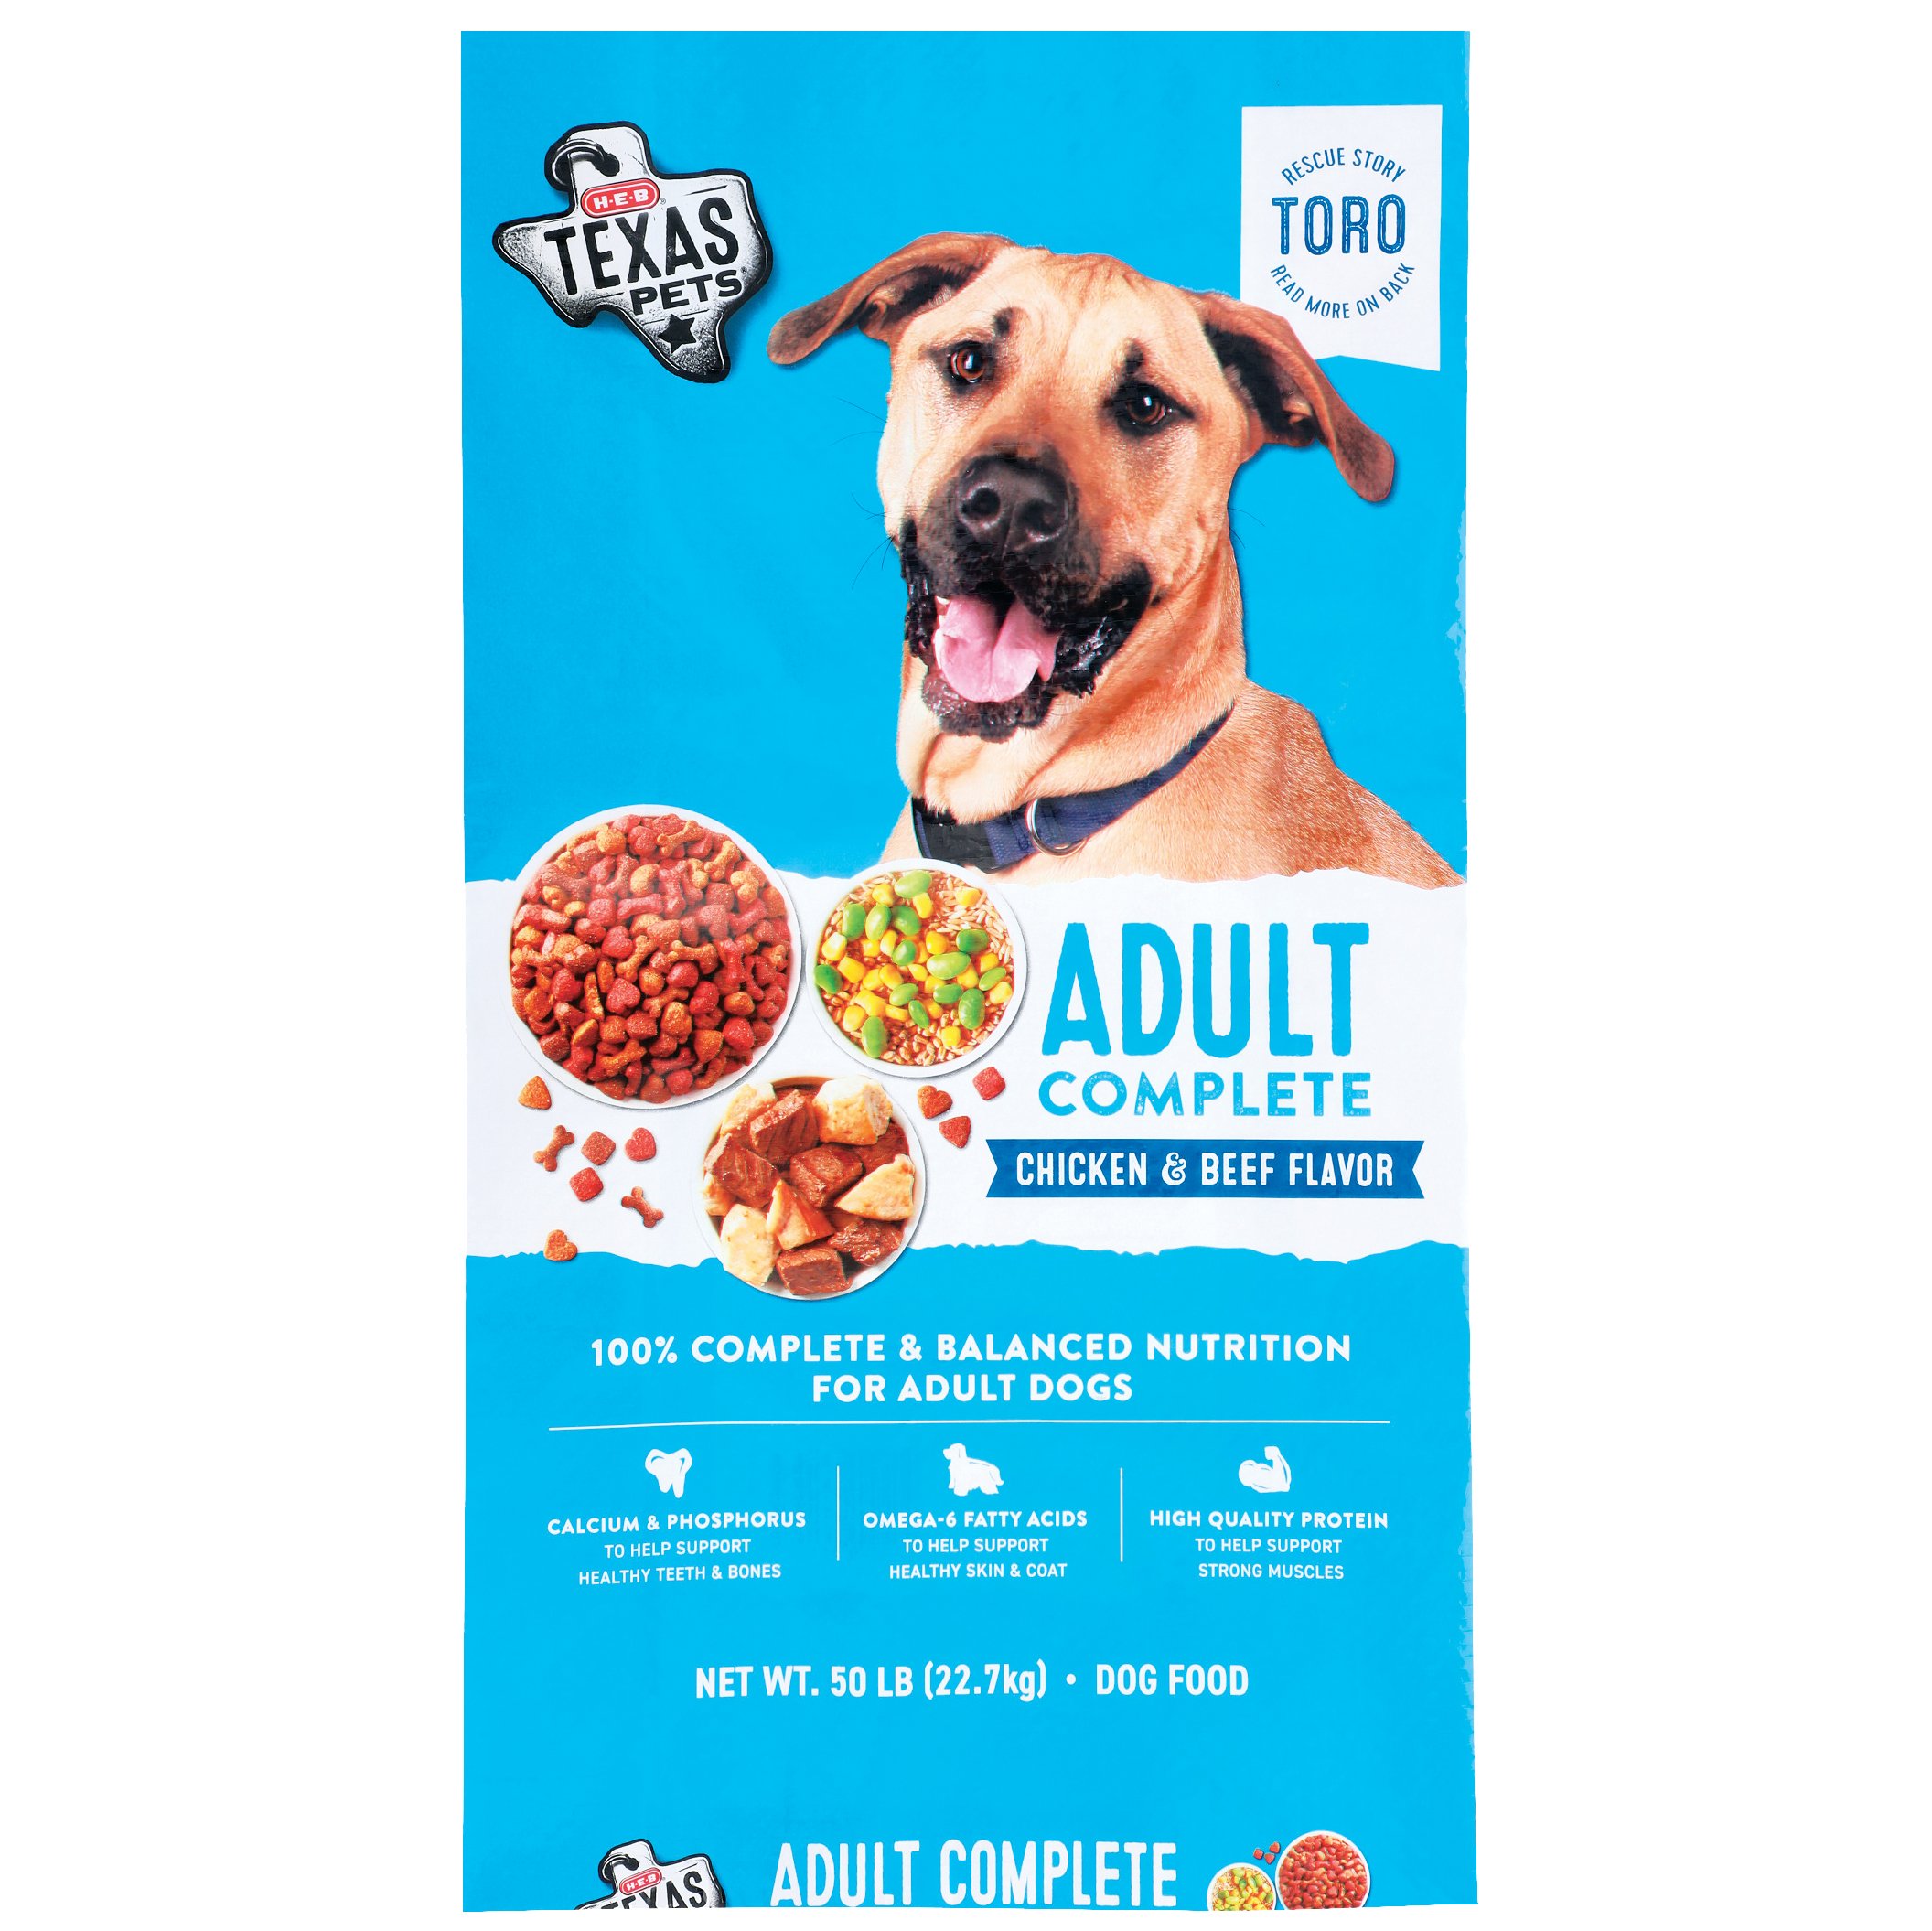 H-E-B Texas Pets Adult Complete Dry Dog Food - Shop Food at H-E-B